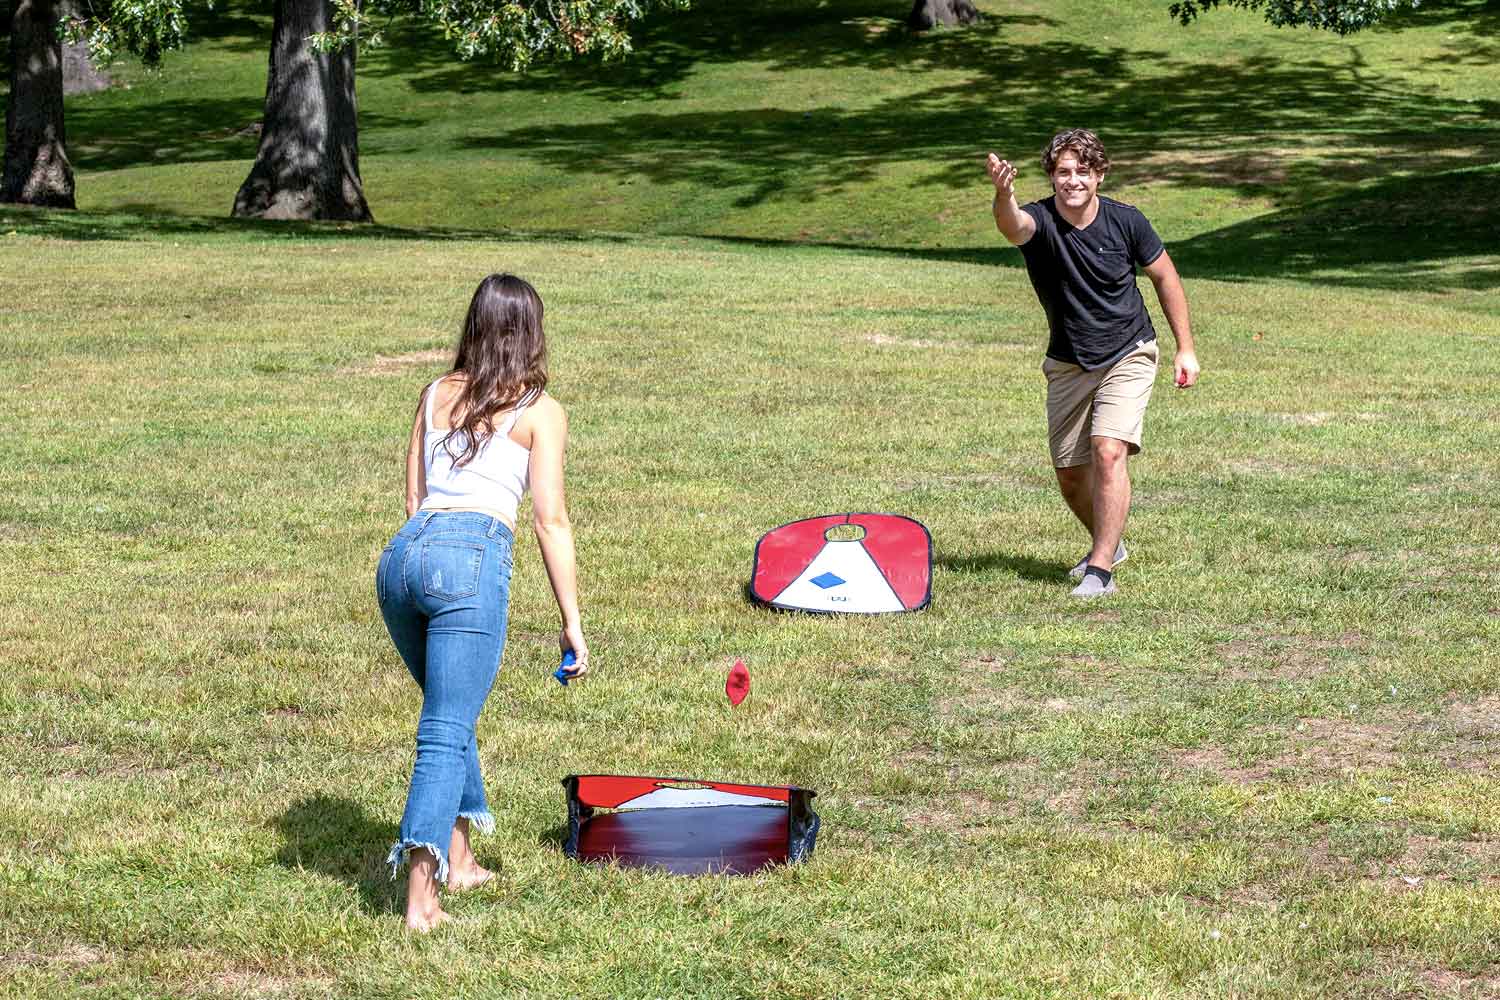 Cornhole Boards Collapsible Corn Hole Game With Carrry Case Outdoor Lawn Game Foldable